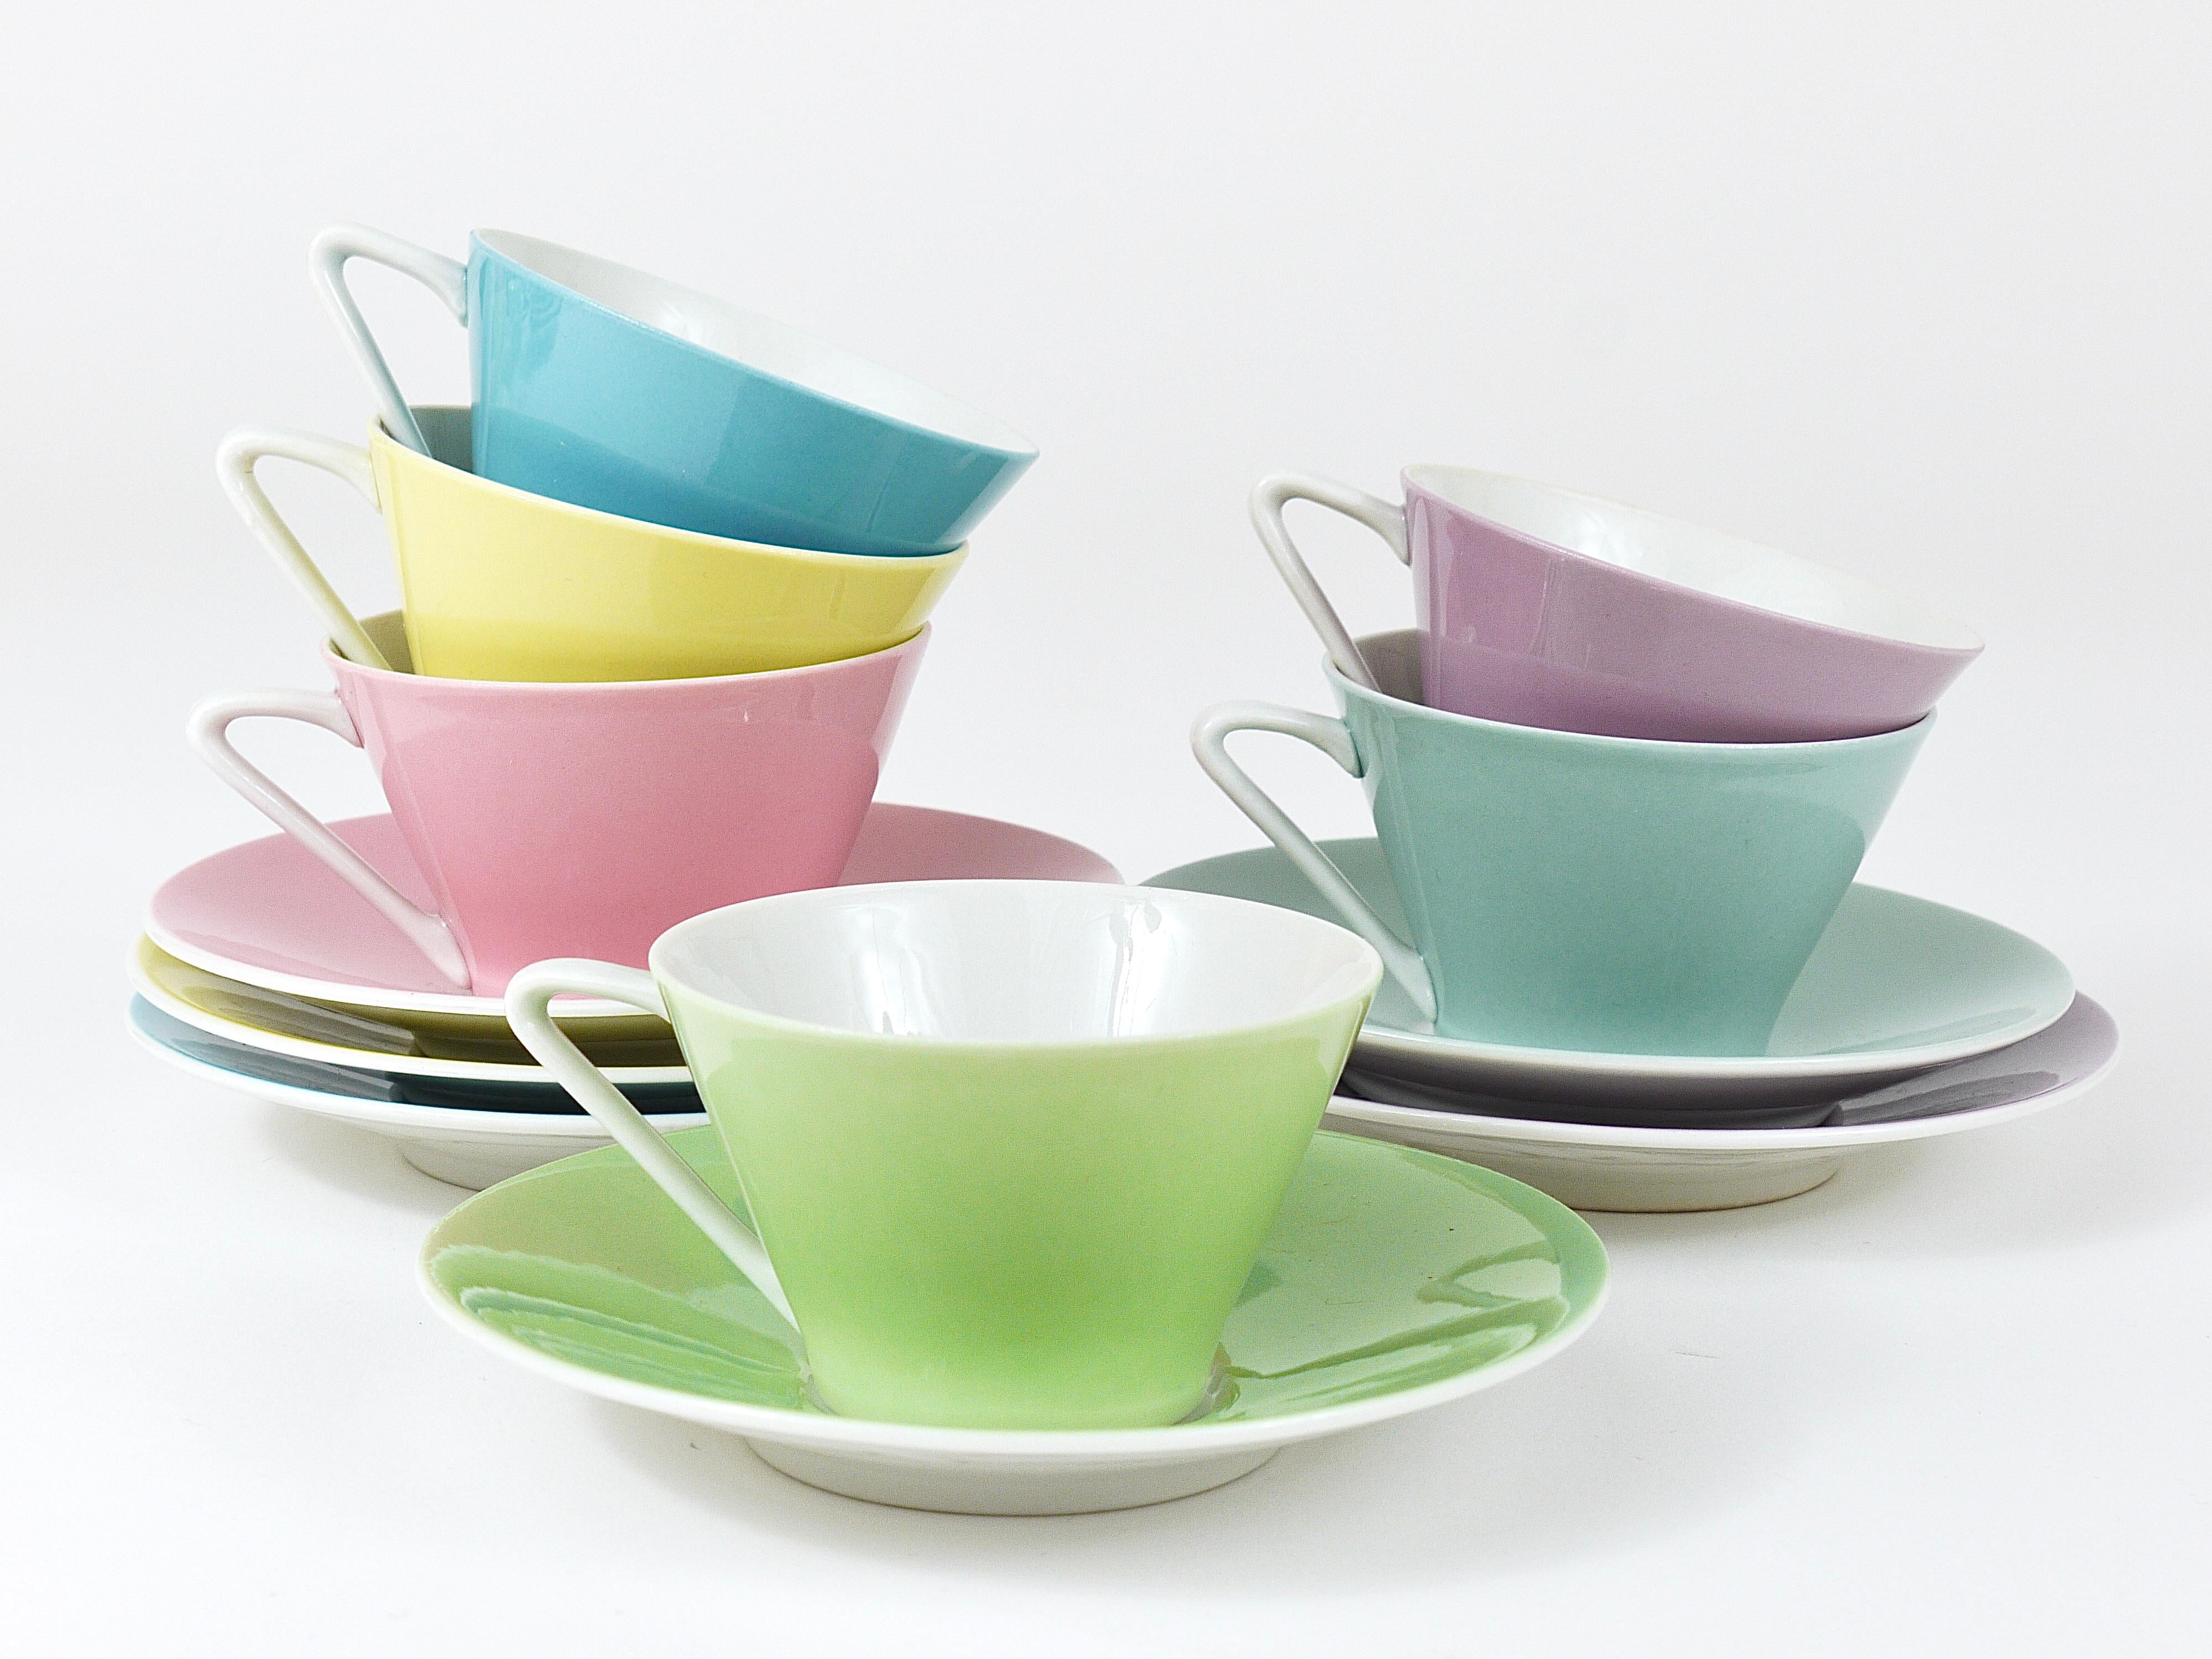 A mokka set of six charming conical espresso coffee cups and saucers from the „Daisy“-series, made of thin, fine china in six different lovely pastel colors, yellow, light blue, light green, bluegray, pink/rosé and lilac. Made in the 1950s by Lilien